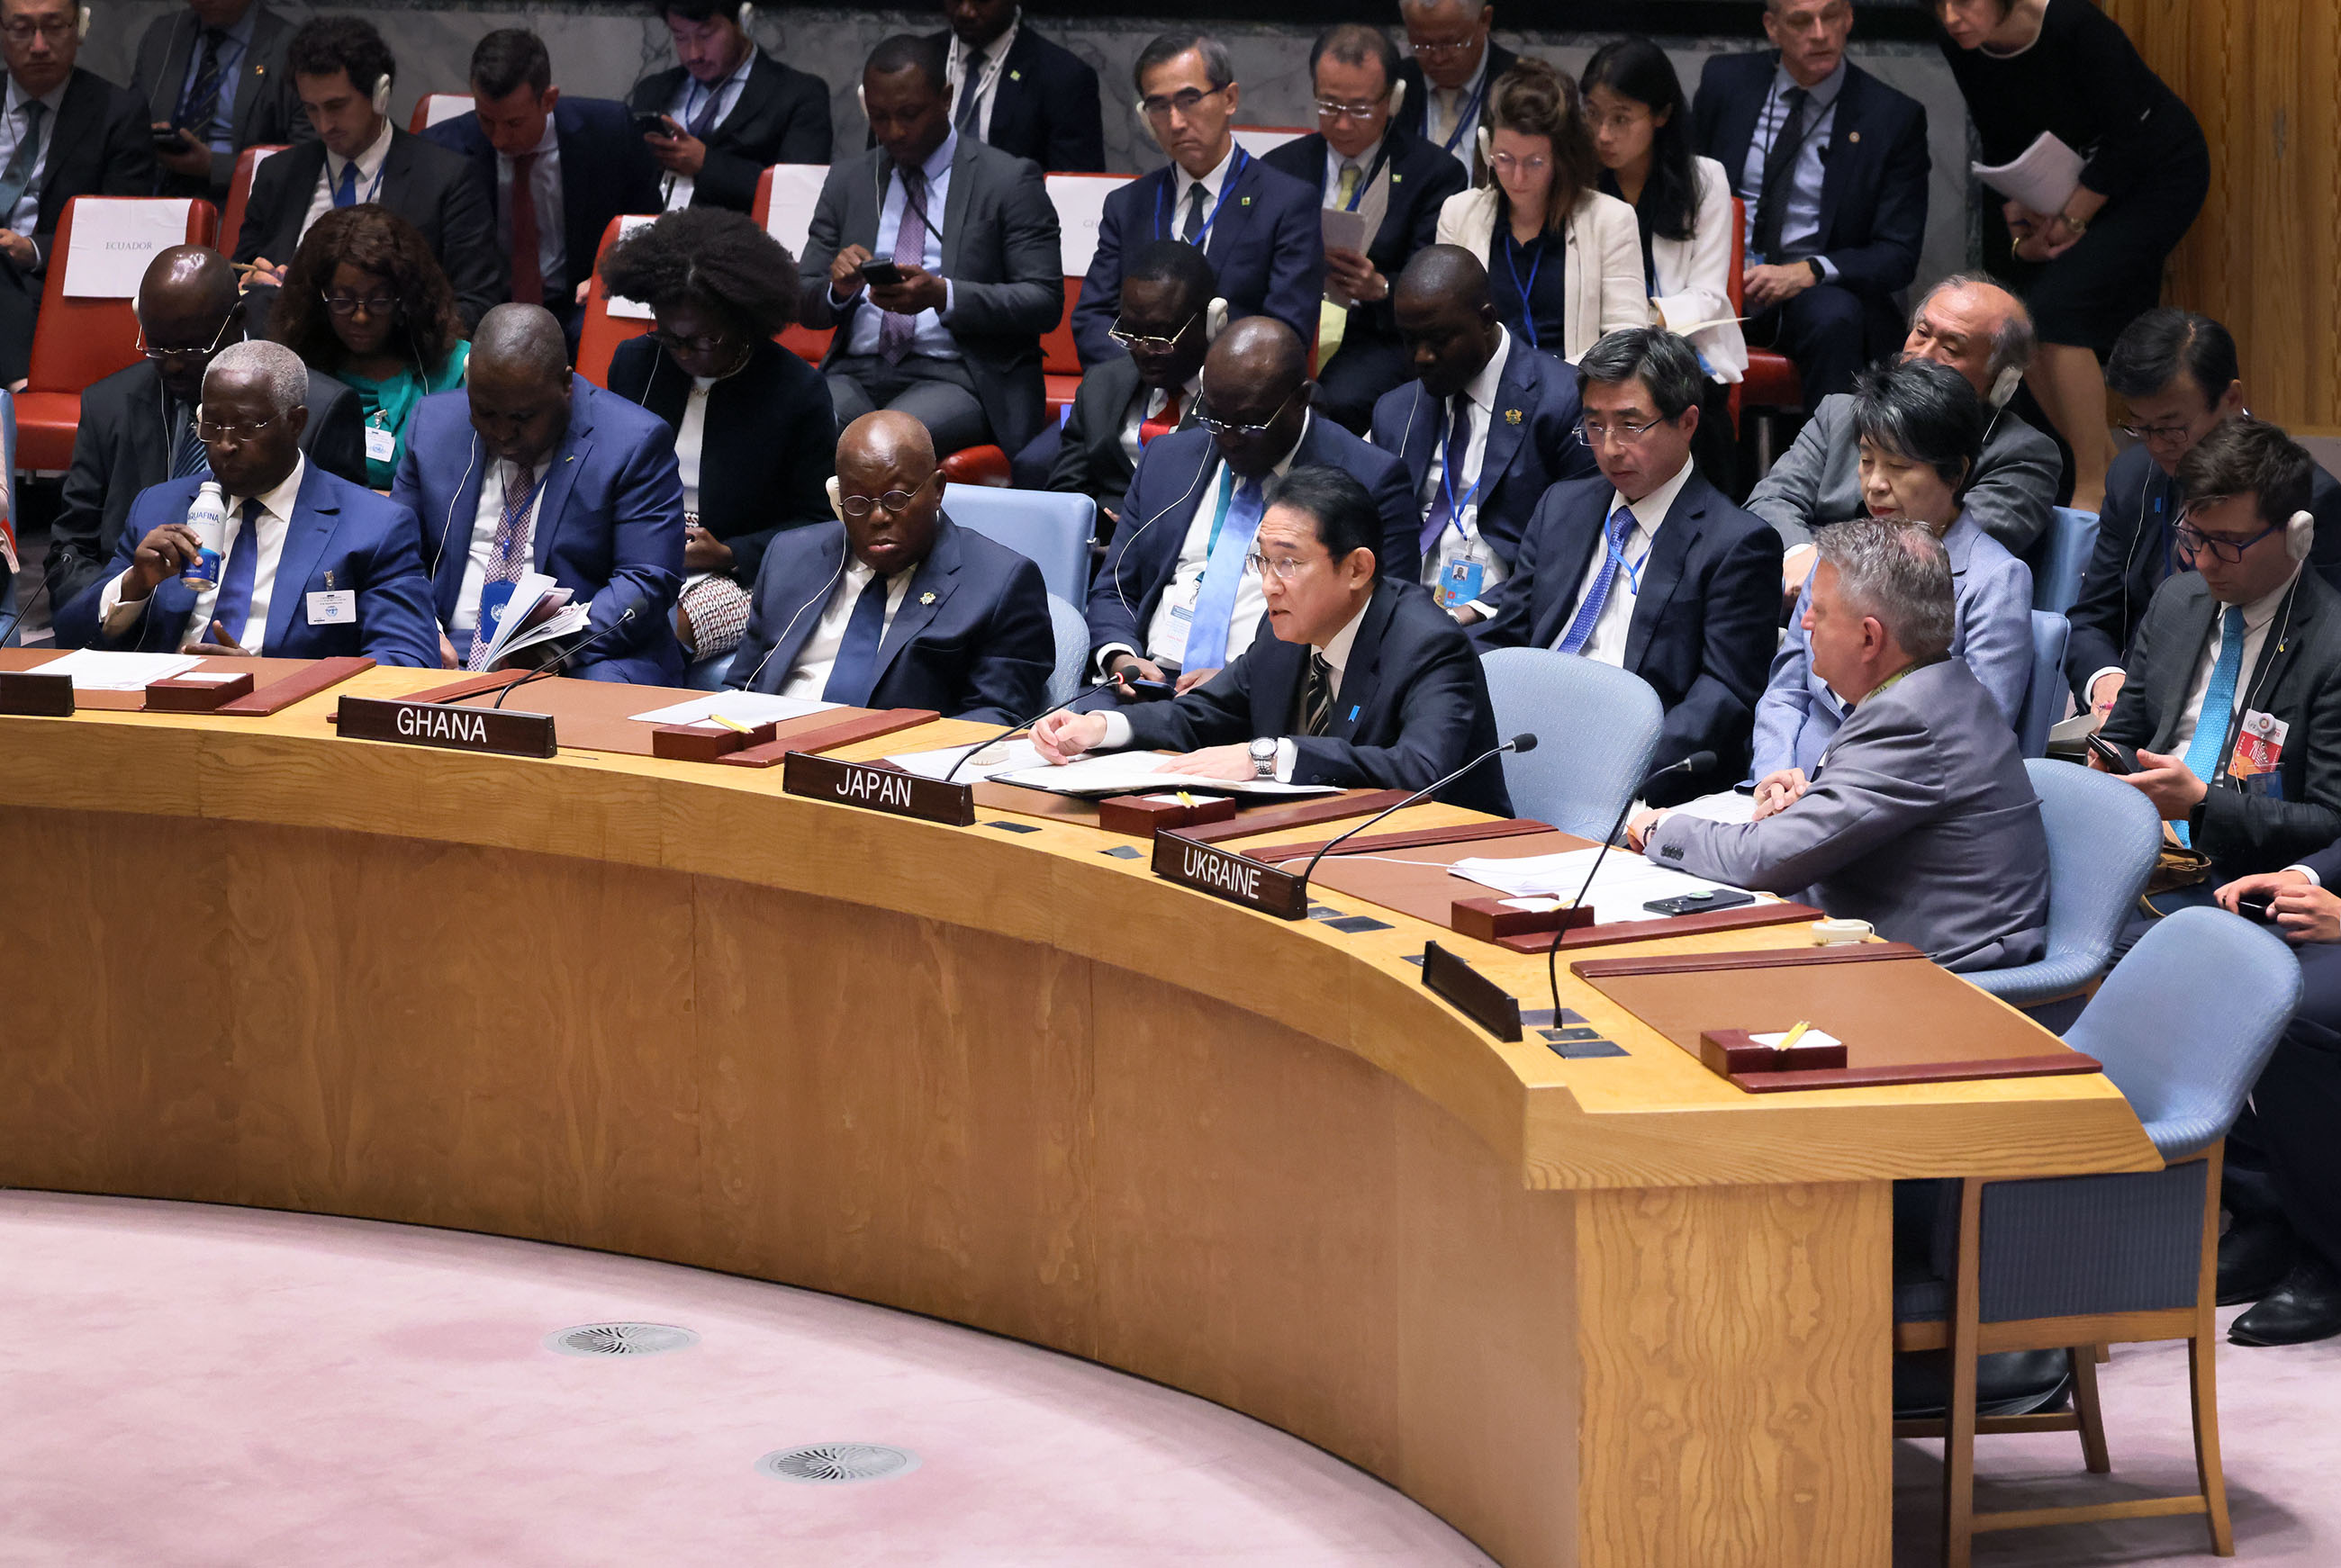 Prime Minister Kishida attending the Security Council High Level Open Debate on “Upholding the purposes and principles of the UN Charter through effective multilateralism: maintenance of peace and security of Ukraine” (5)